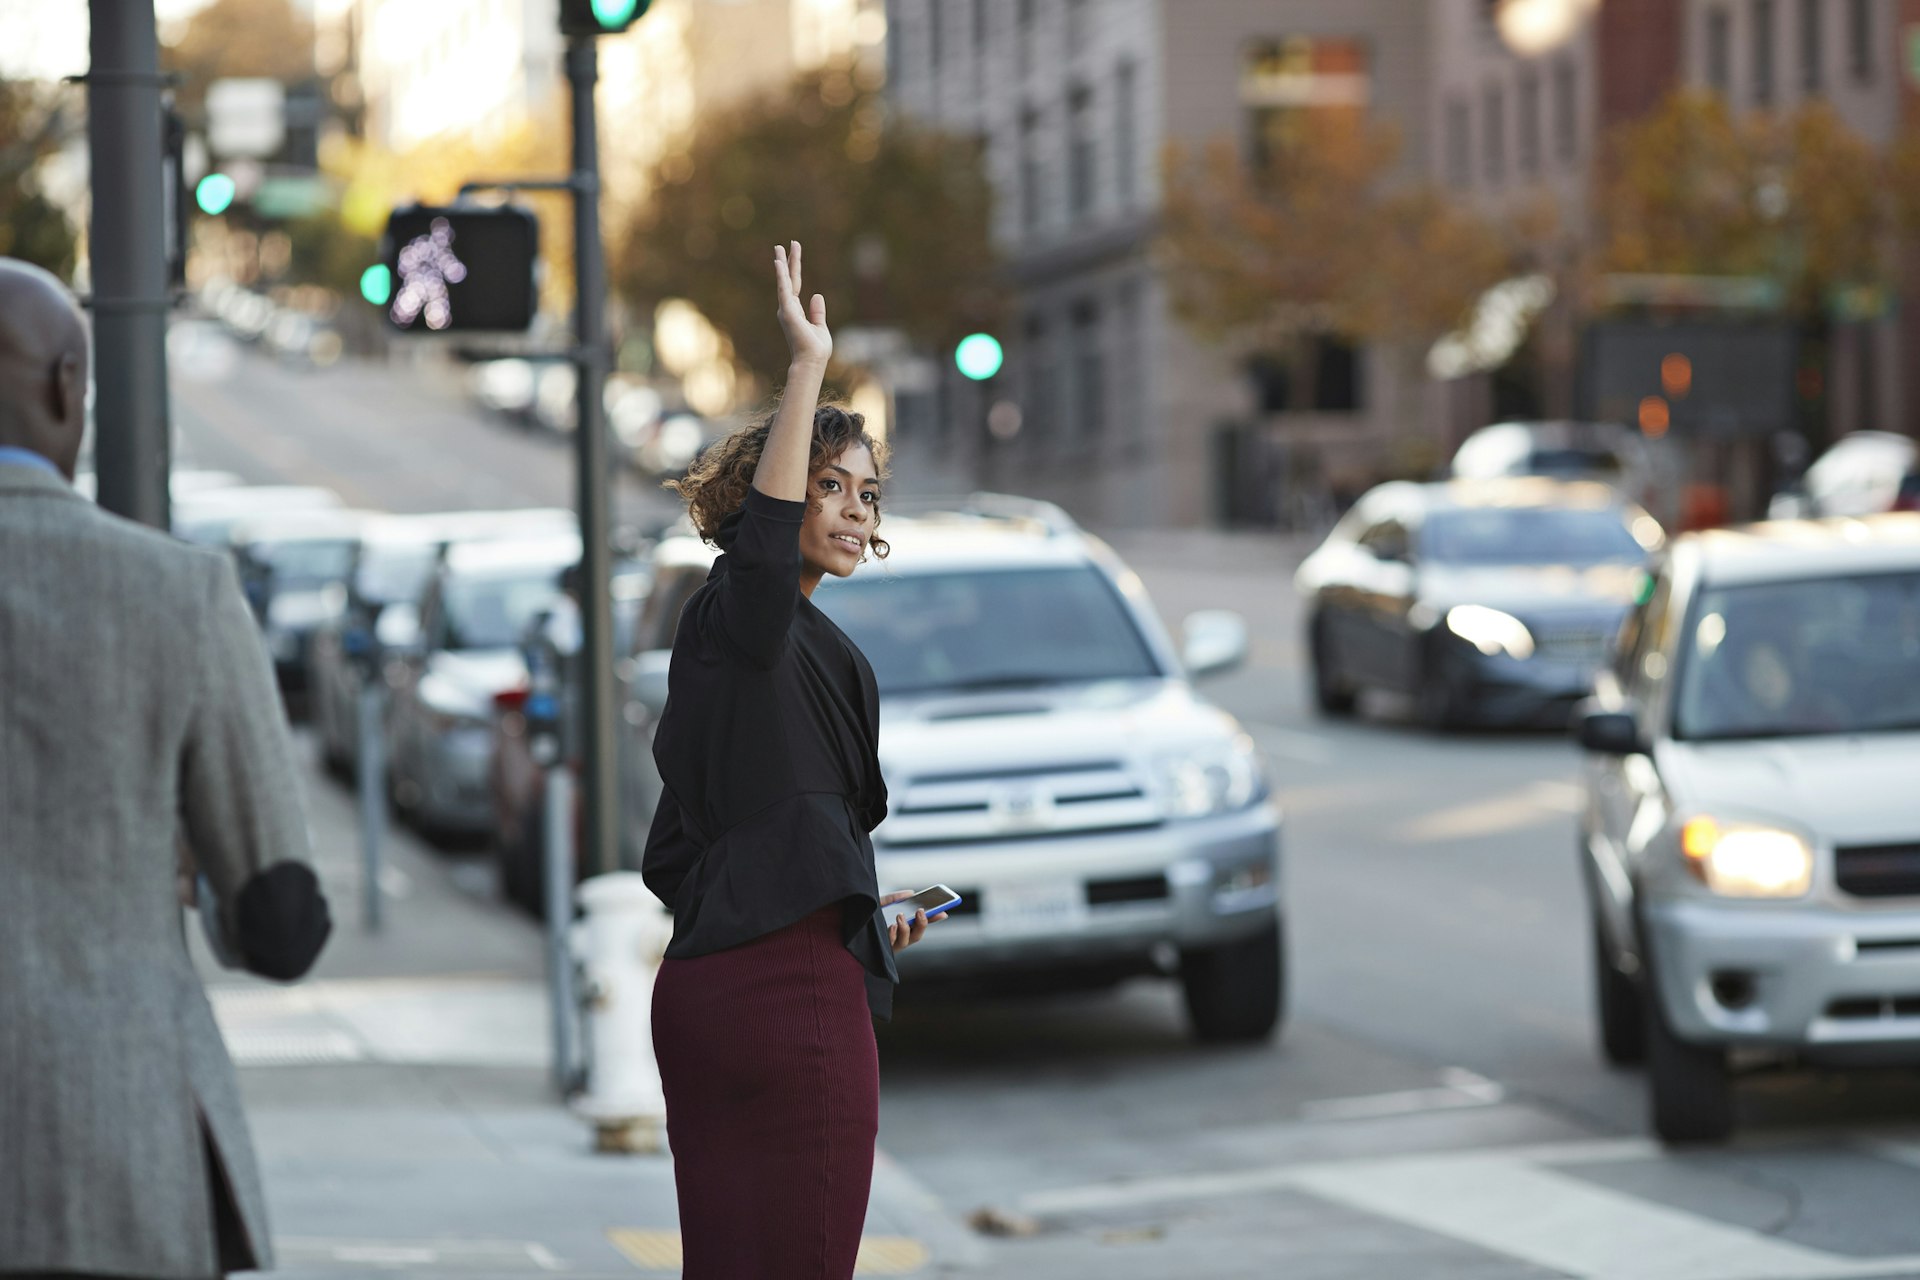 A young woman hails a taxi on a busy city street